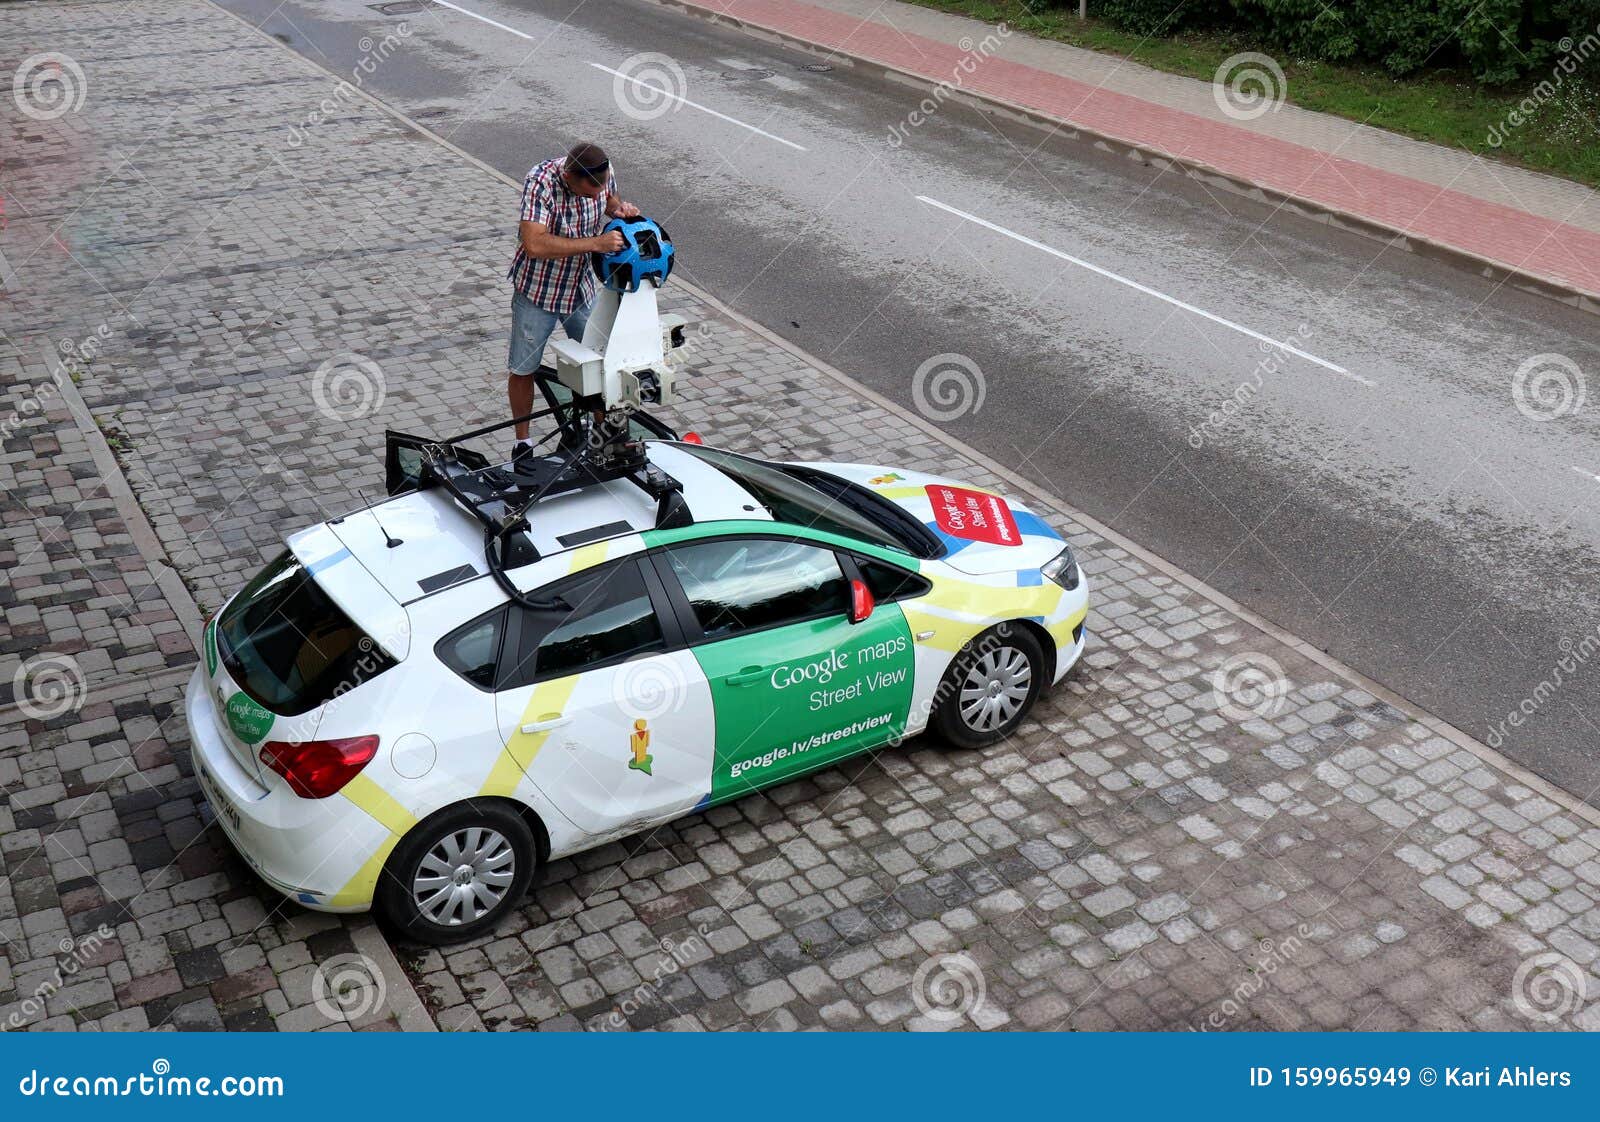 Goggle street view